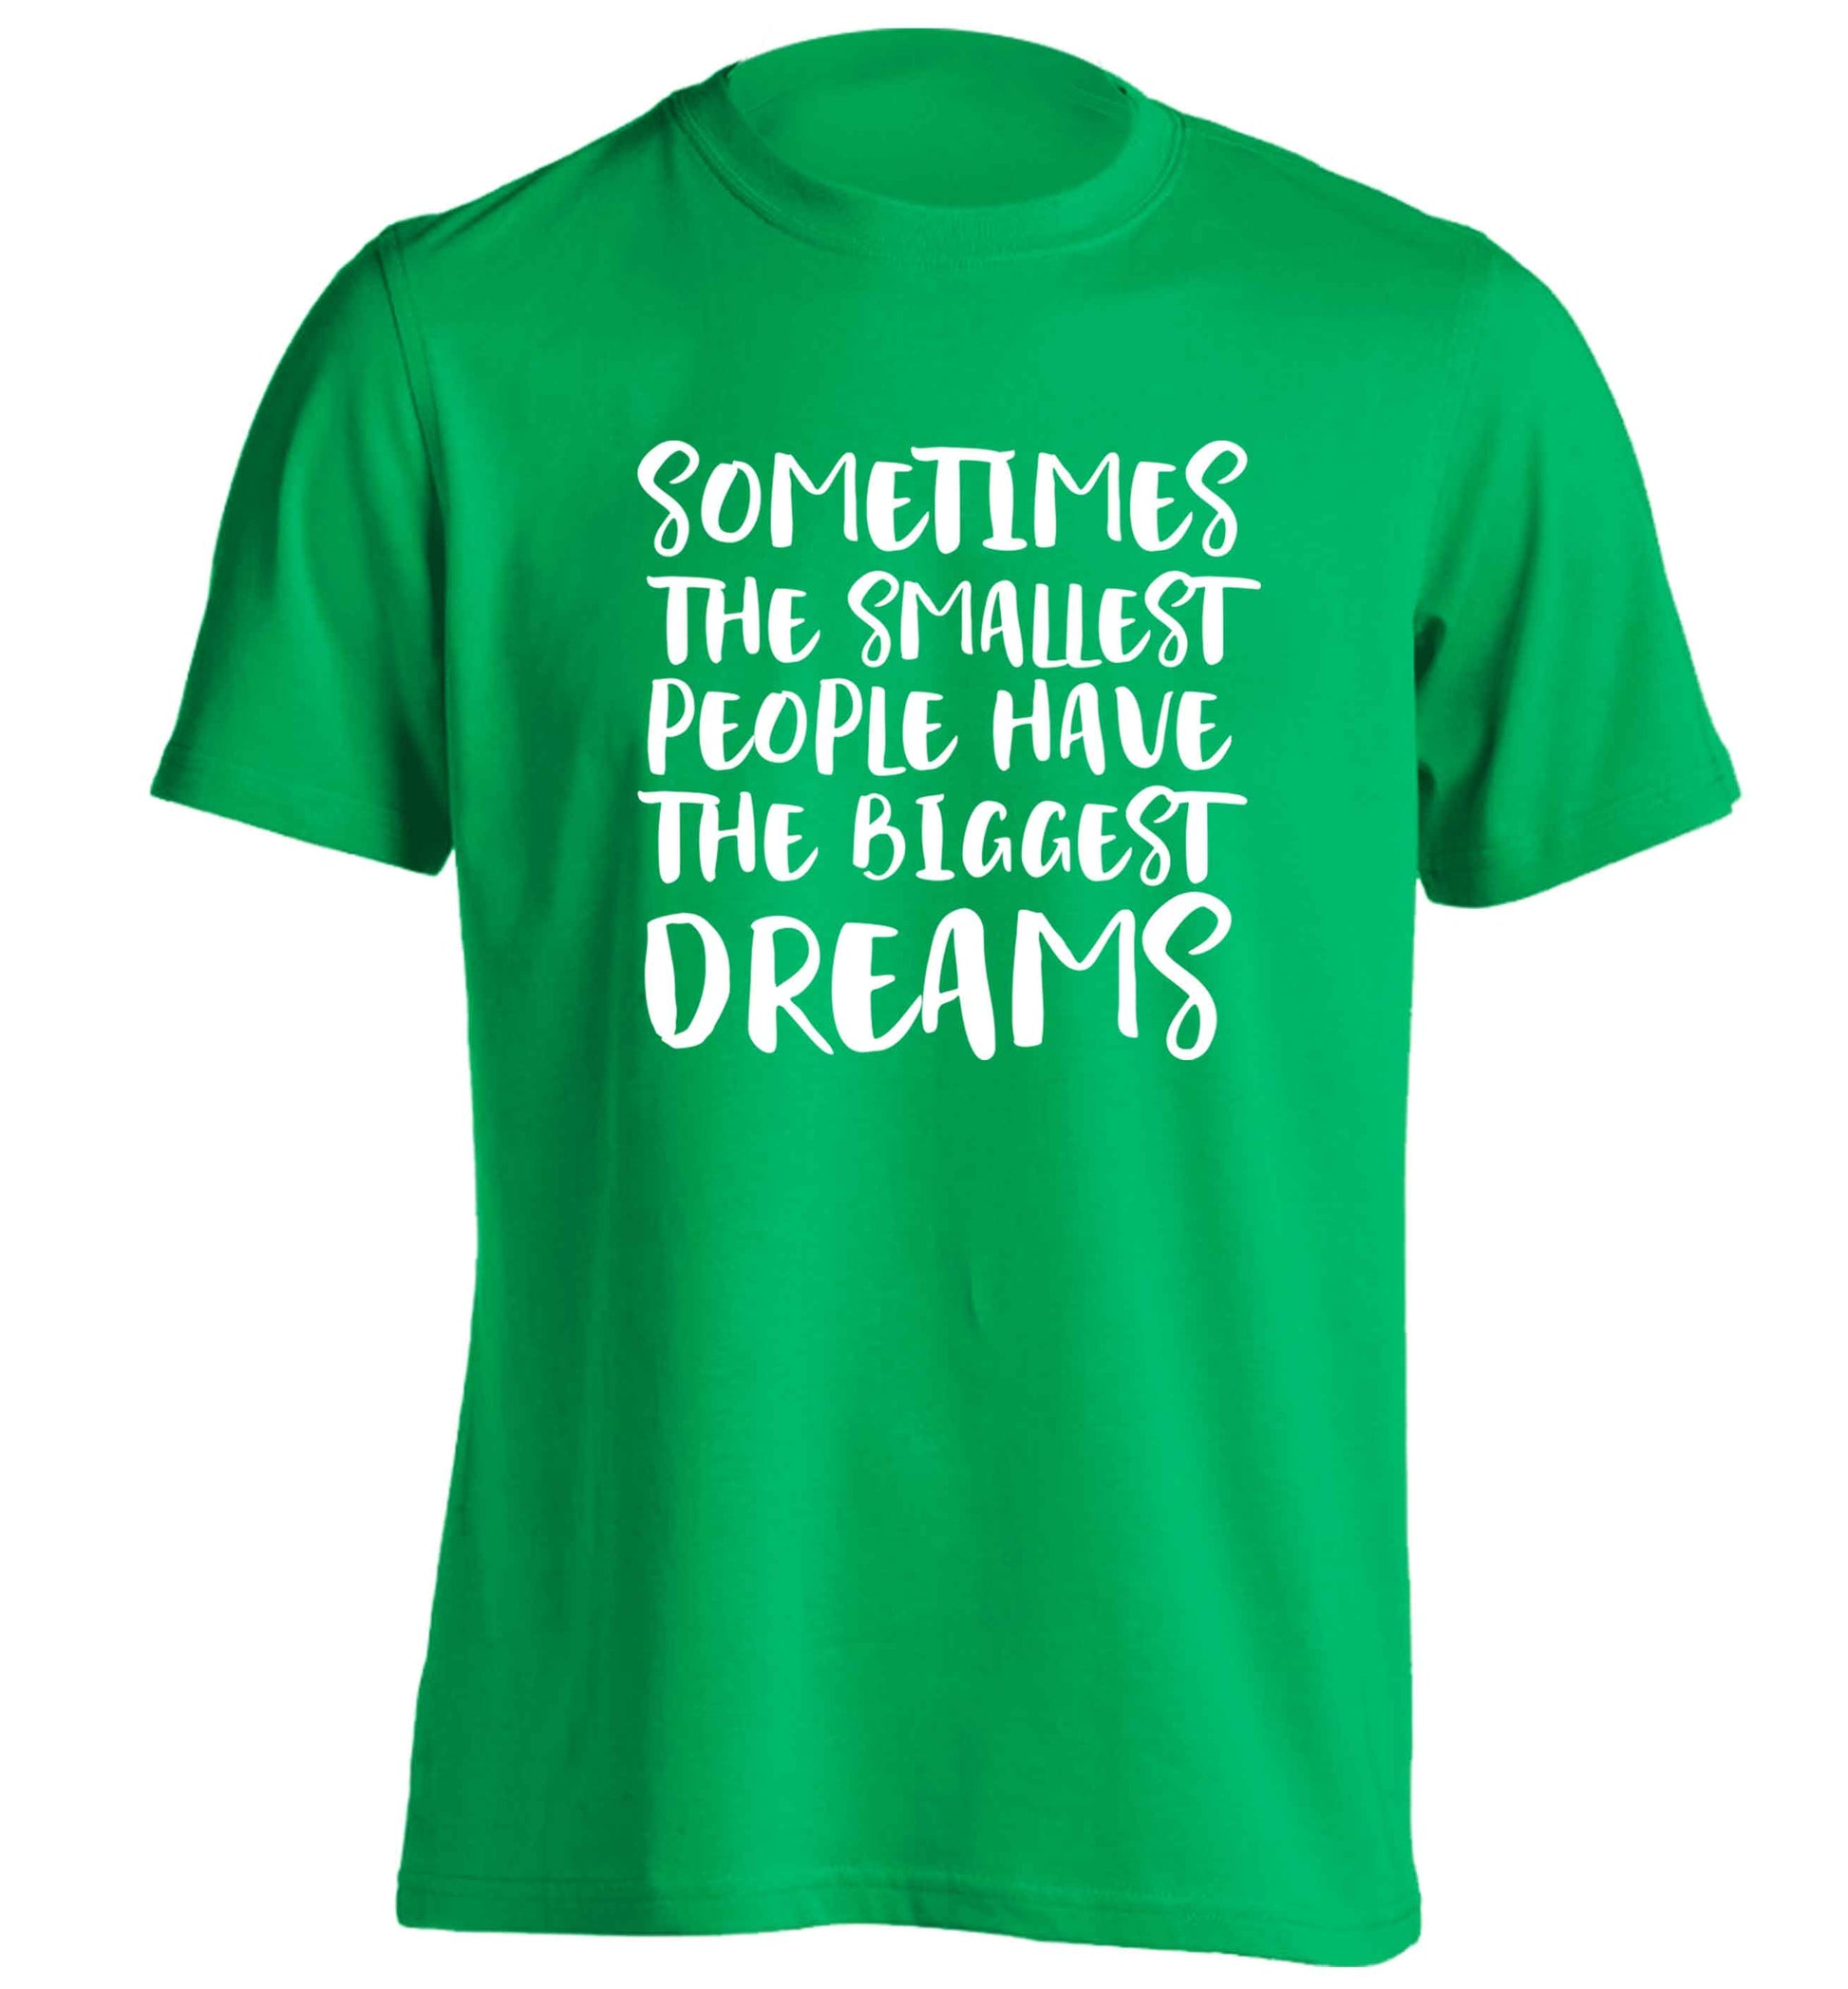 Sometimes the smallest people have the biggest dreams adults unisex green Tshirt 2XL